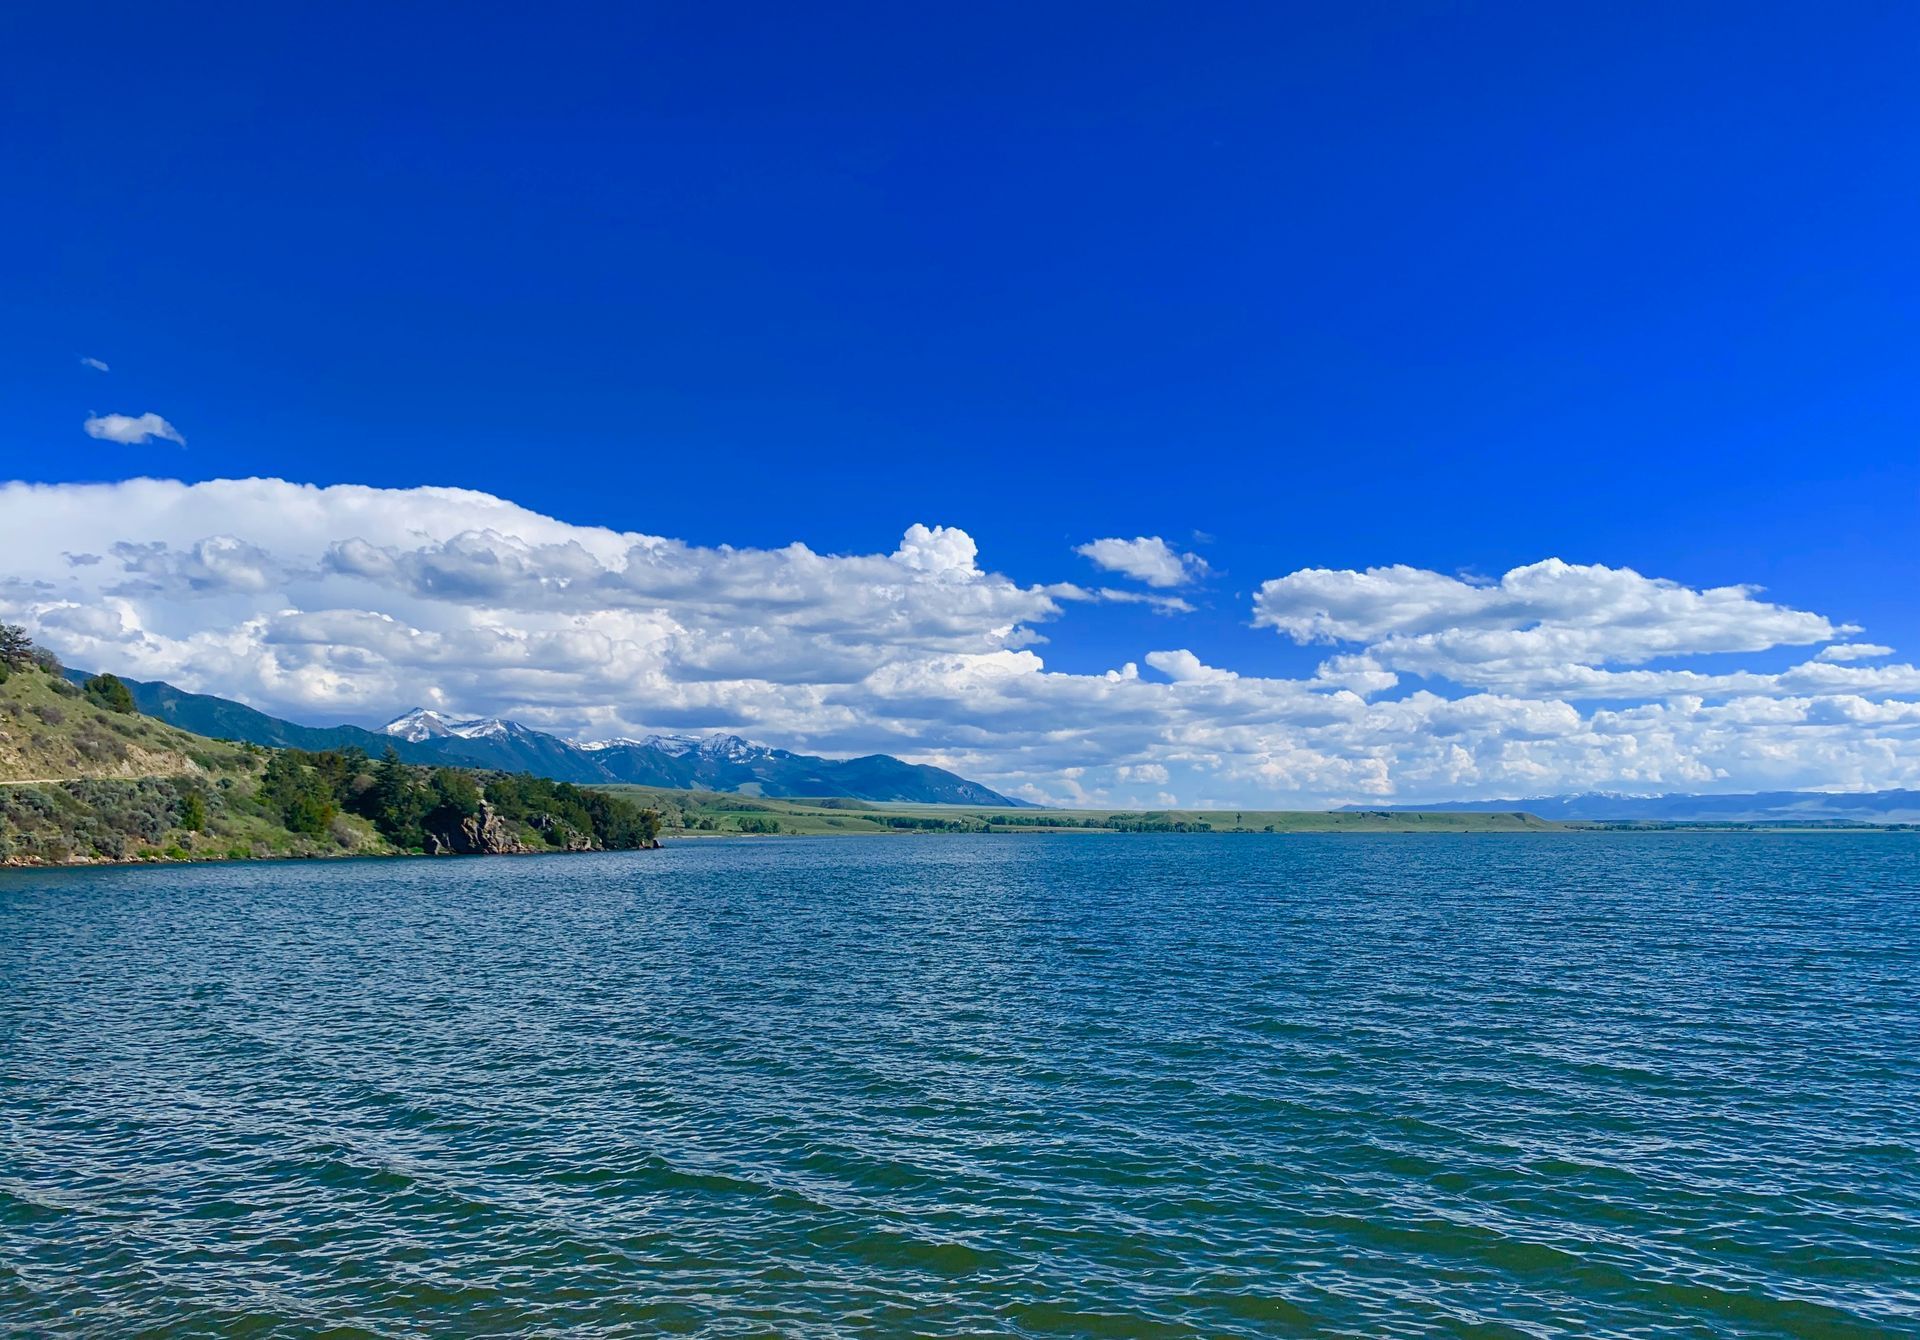 A large body of water with mountains in the background and a blue sky with clouds.